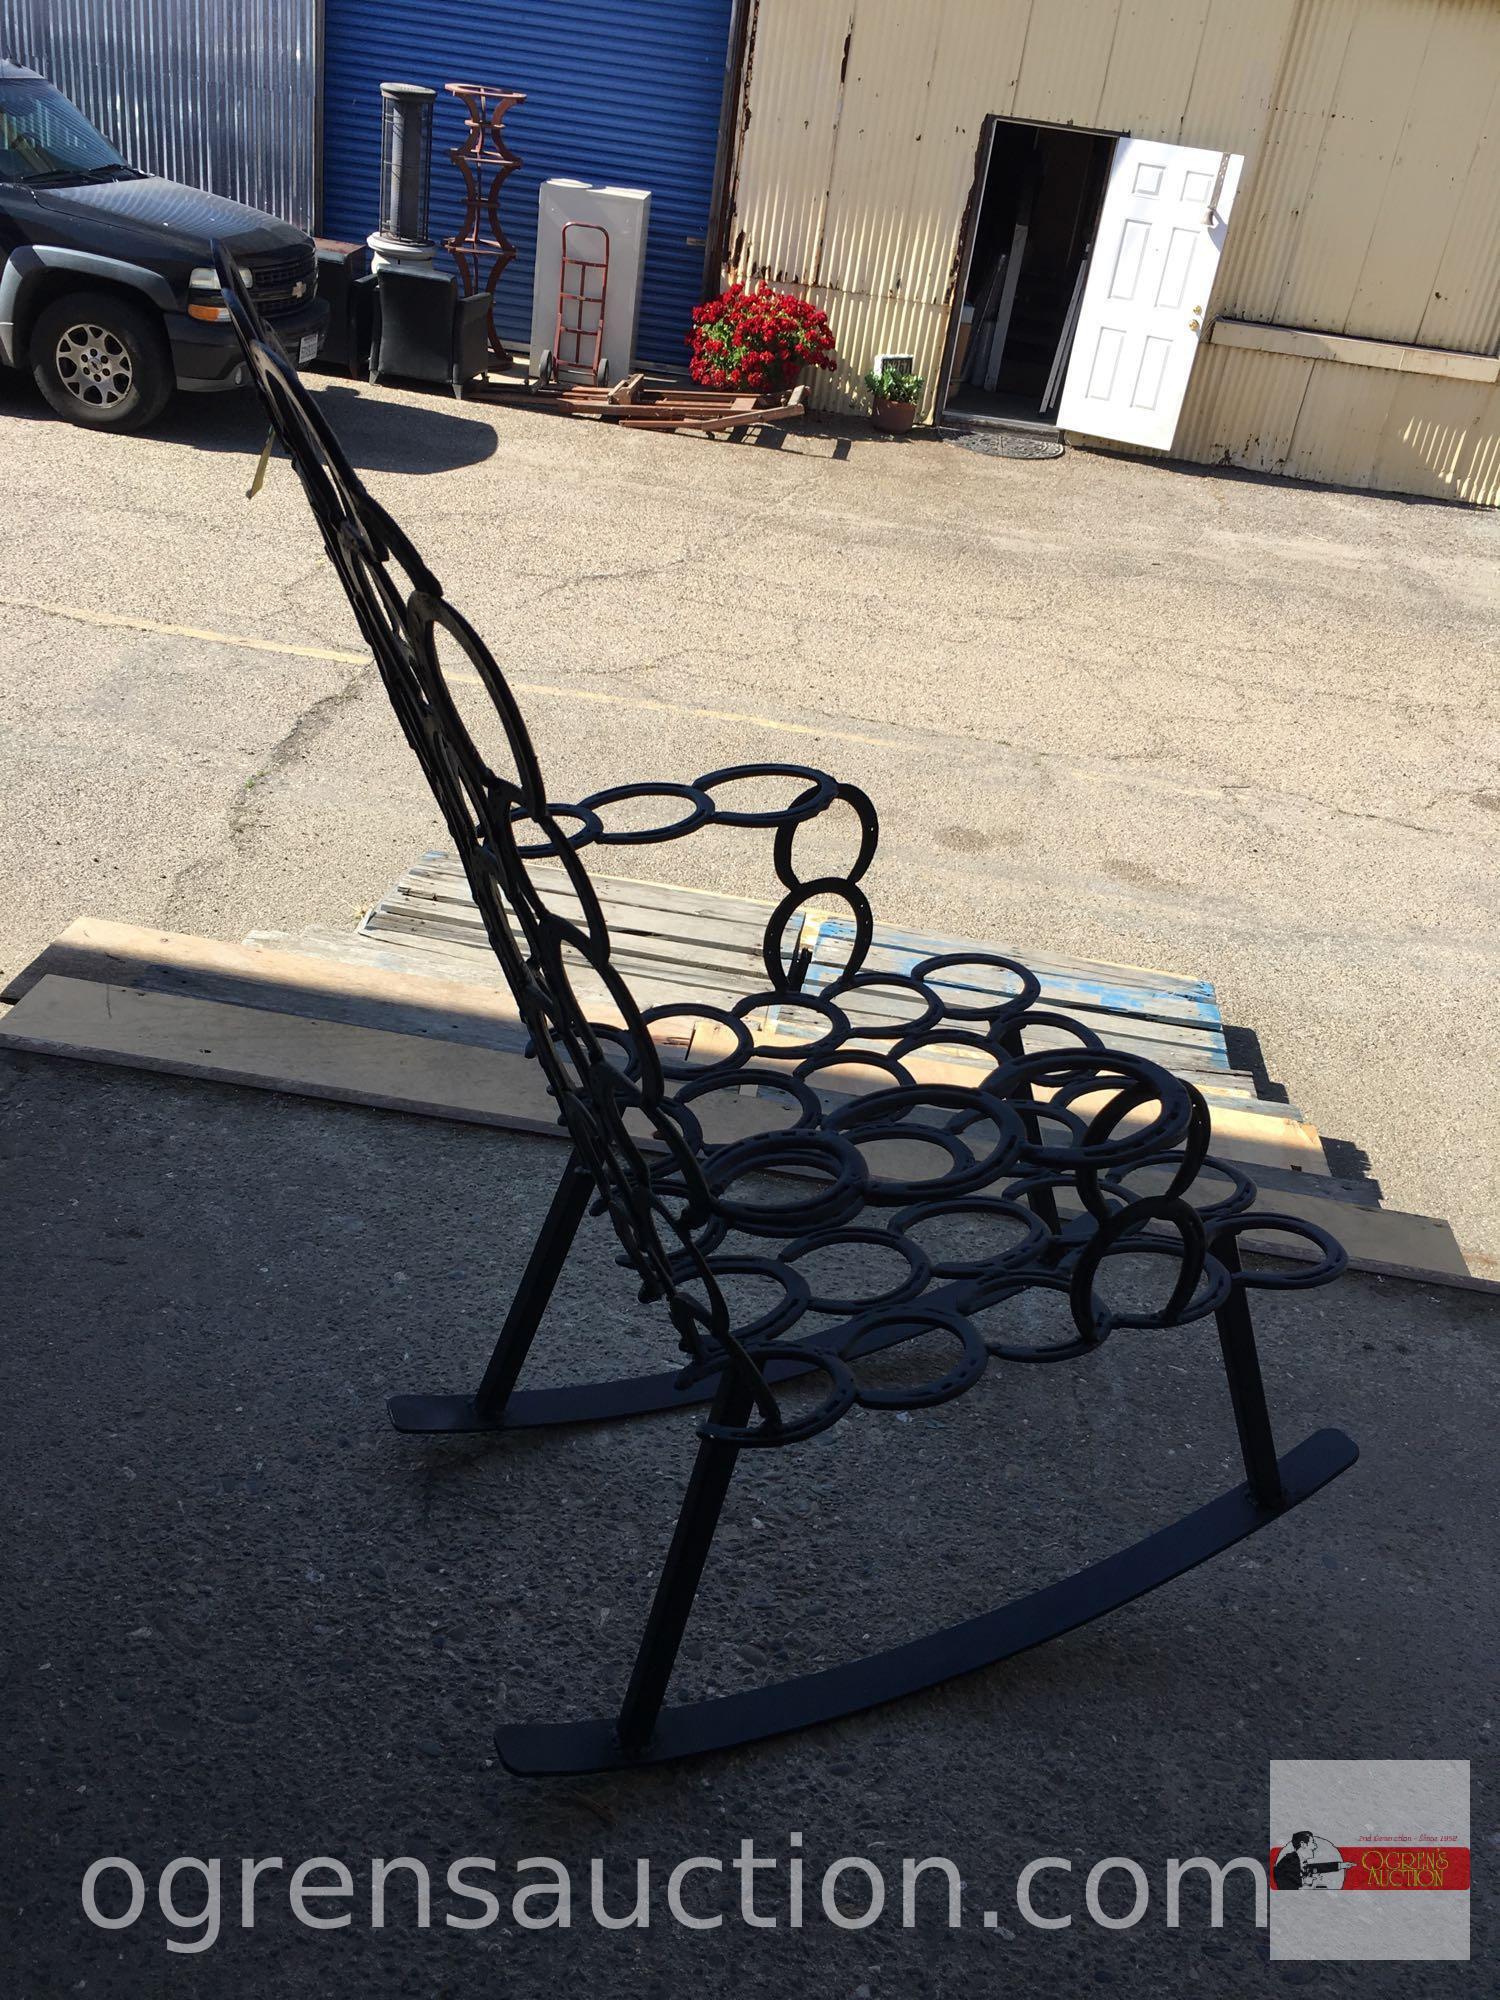 Rocking chair - Iron Horseshoe rocking chair, hand crafted with 69 horseshoes